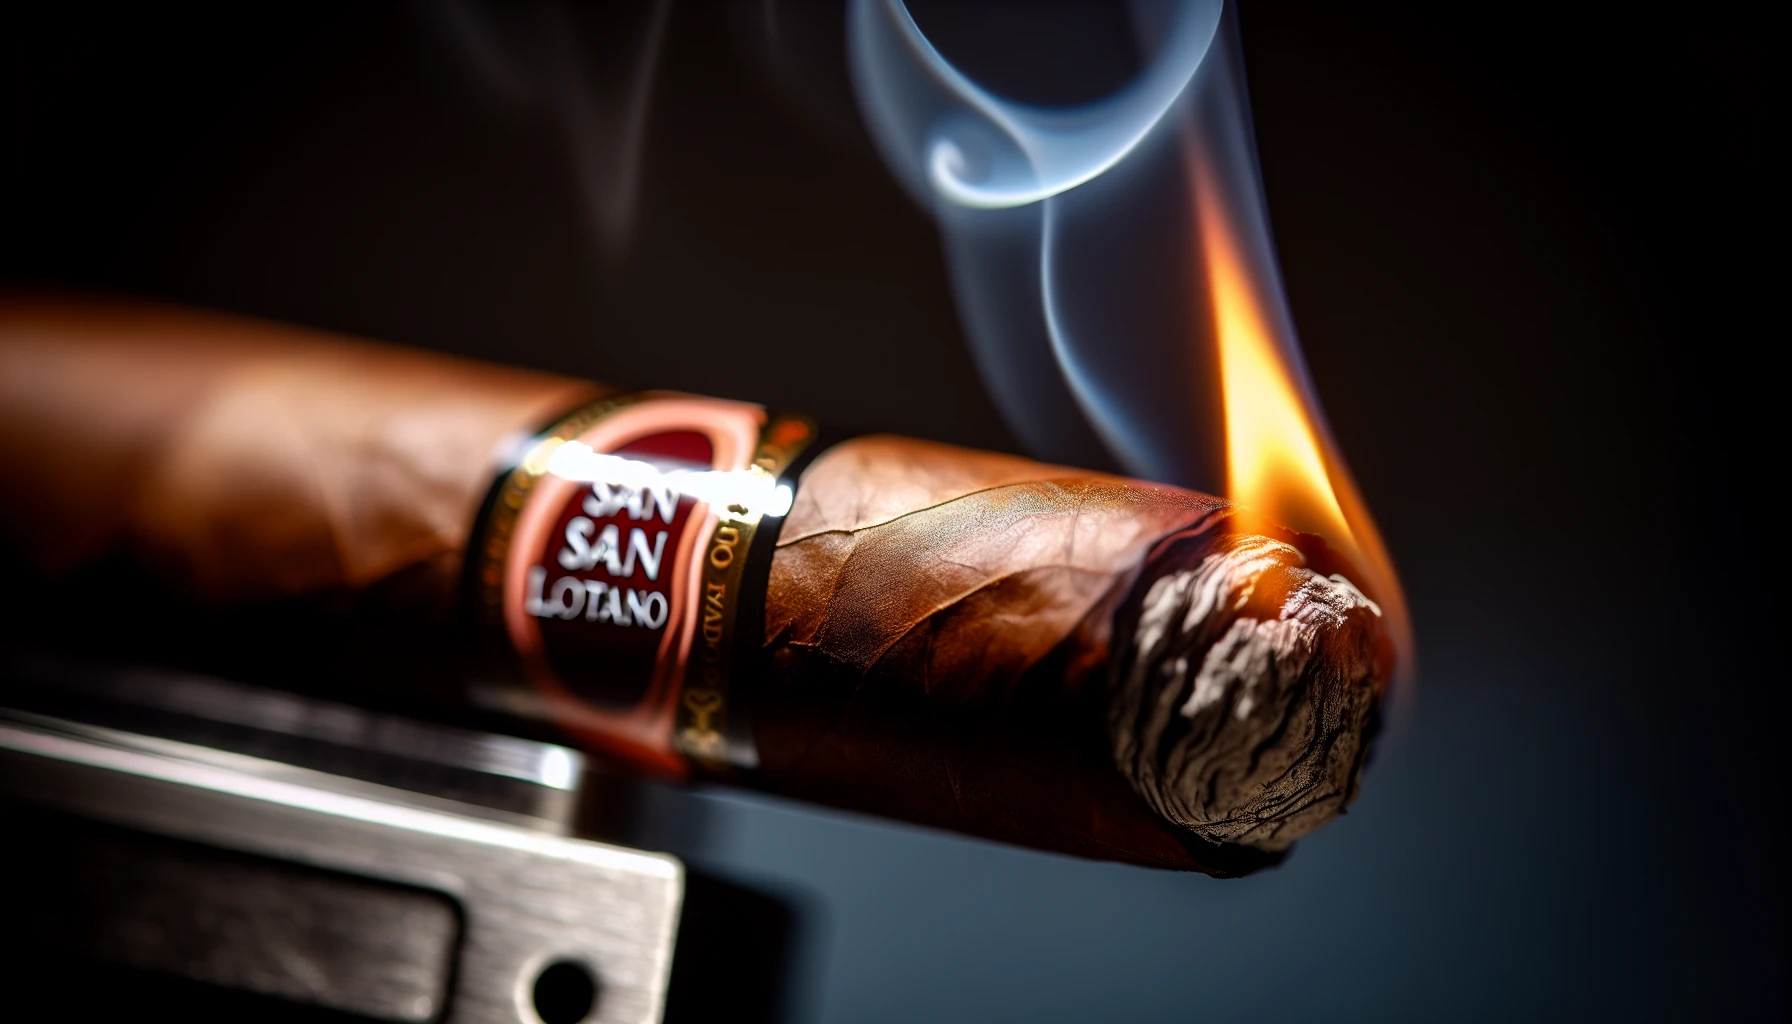 A close-up of a San Lotano Requiem Habano Toro cigar with a lit end, exuding aromatic smoke